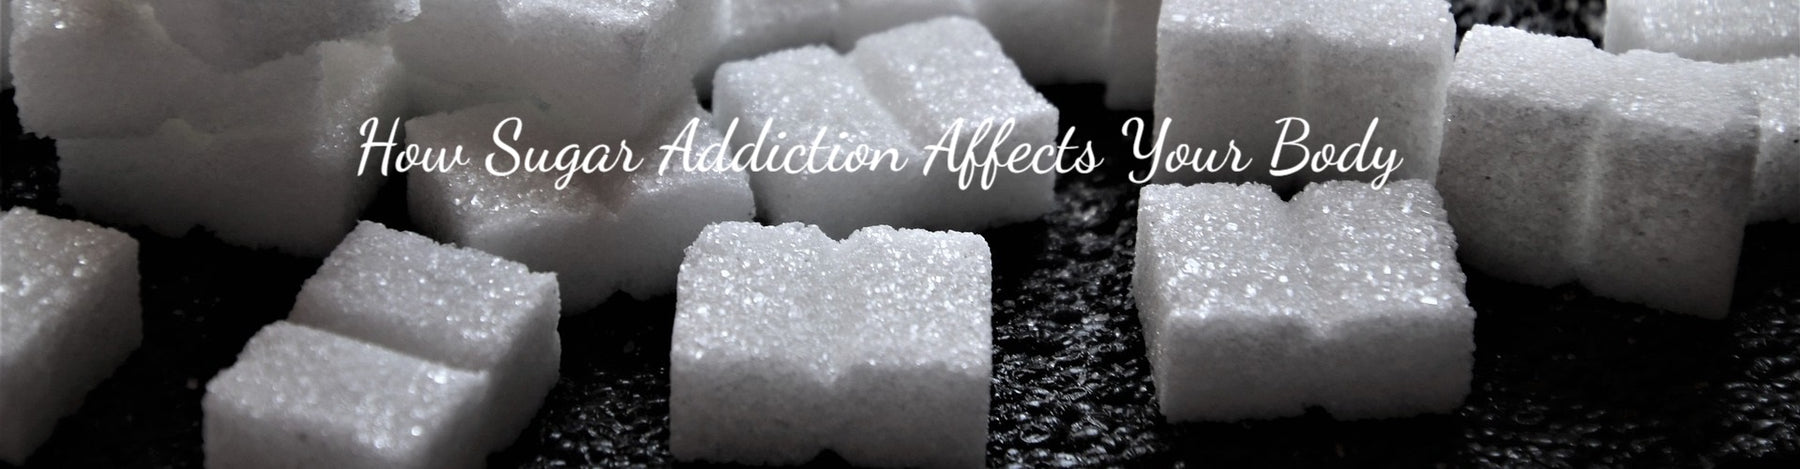 How Sugar Addiction Affects Your Body